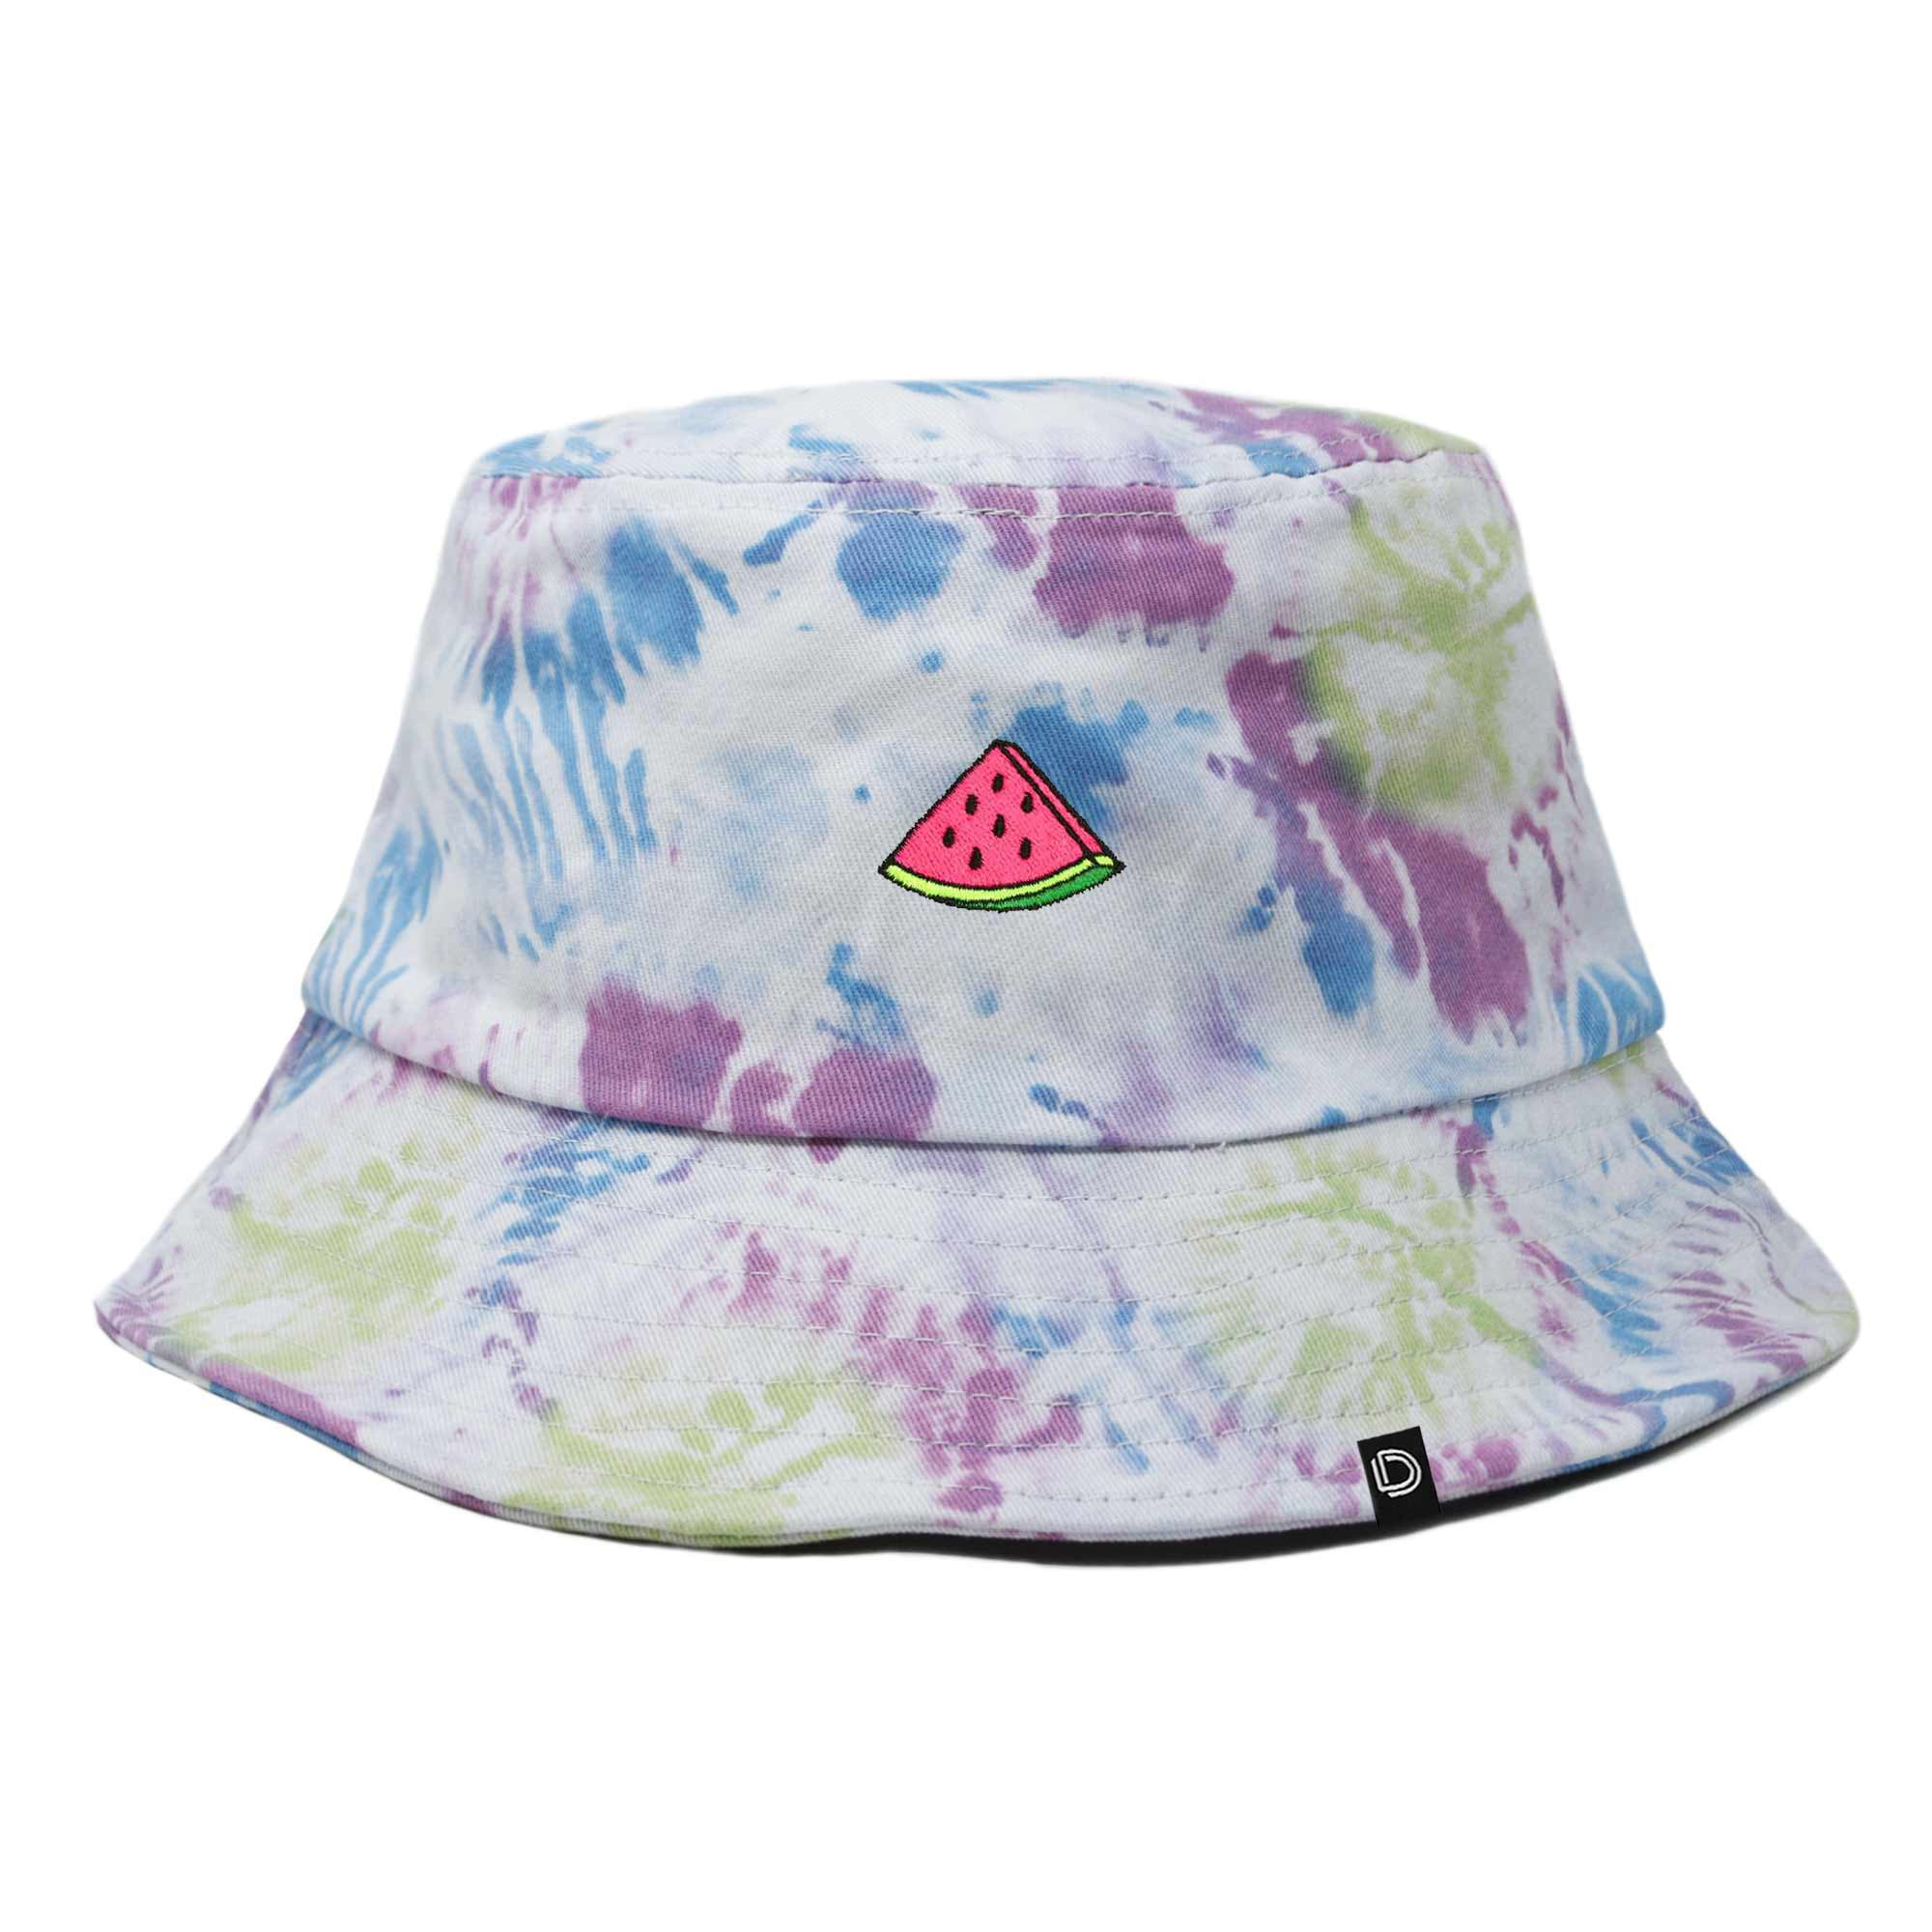 Teens Summer Watermelon Flamingo New Summer Unisex Cotton Fashion Fishing Sun Bucket Hats for Kid Women and Men with Customize Top Packable Fisherman Cap for Outdoor Travel